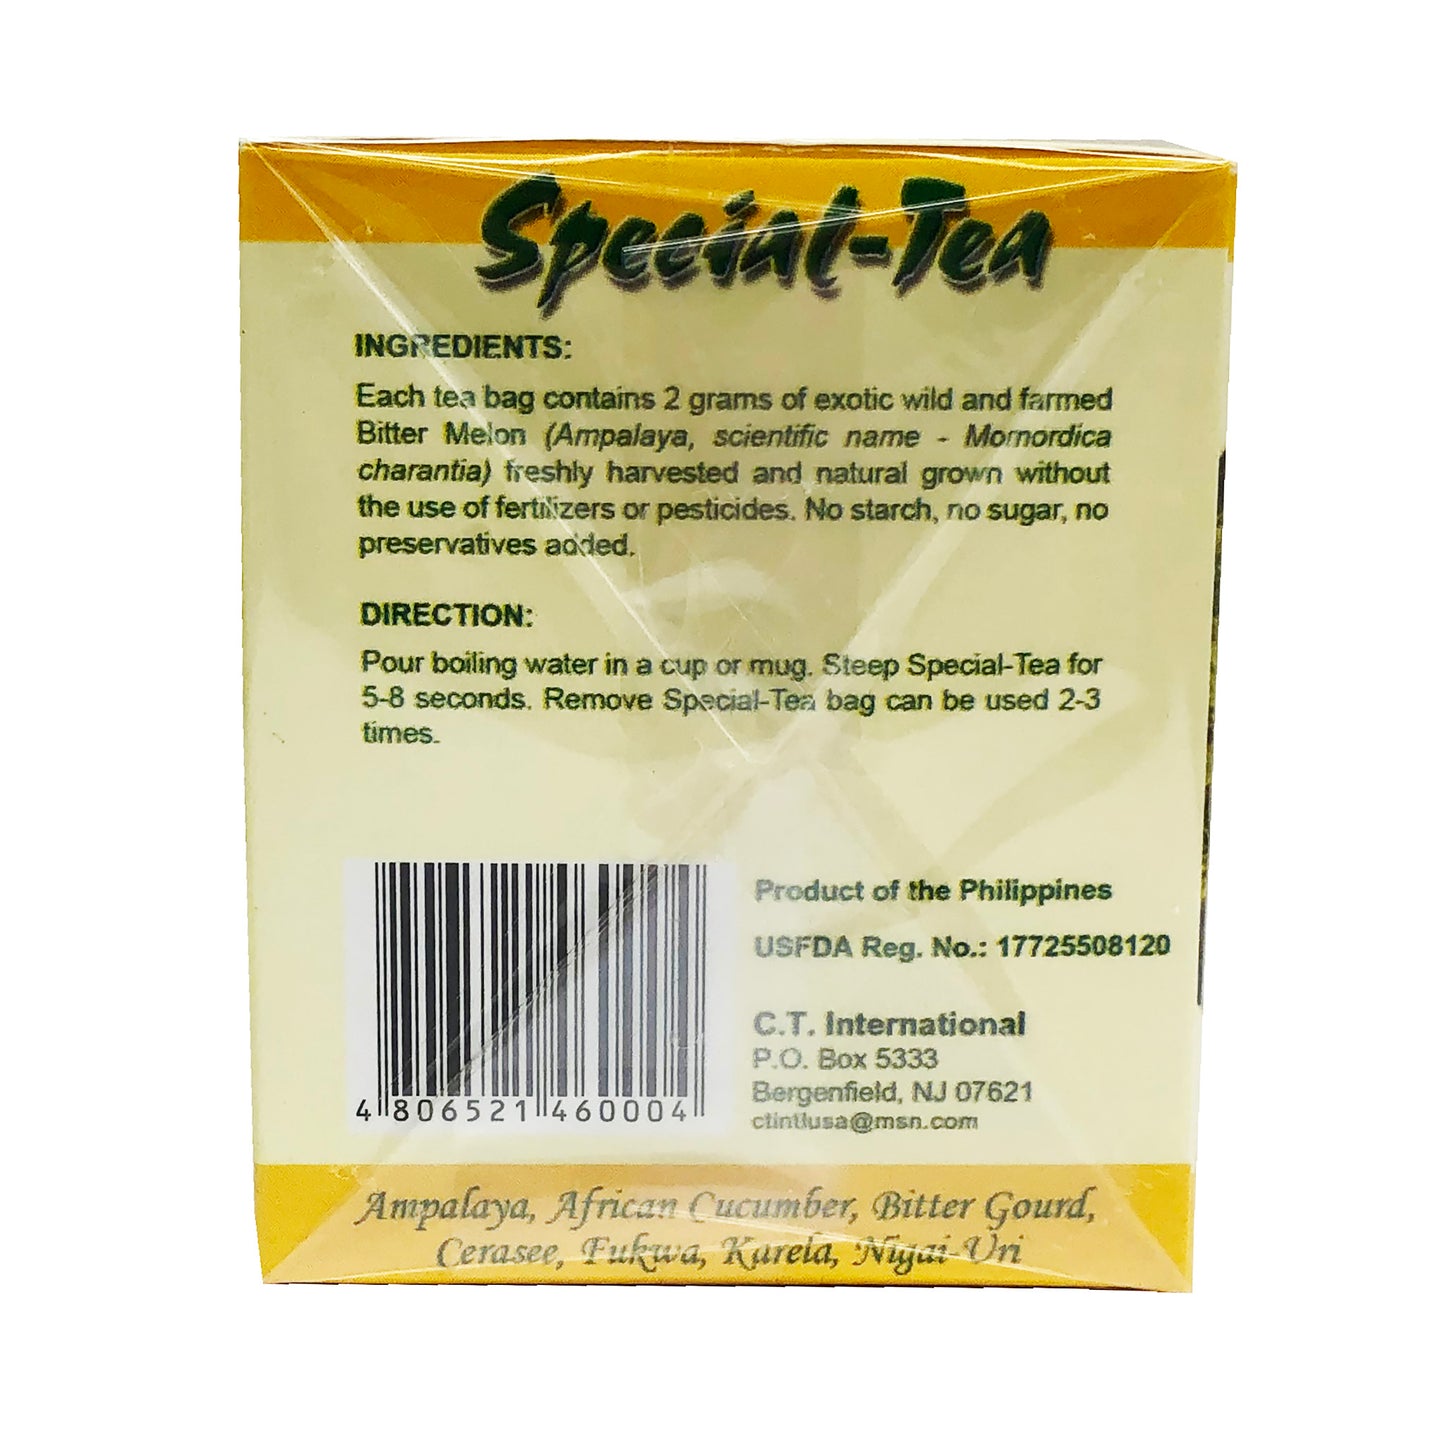 Back graphic image of Special Tea Exotic Ampalaya Bitter Melon Tea 2.11oz